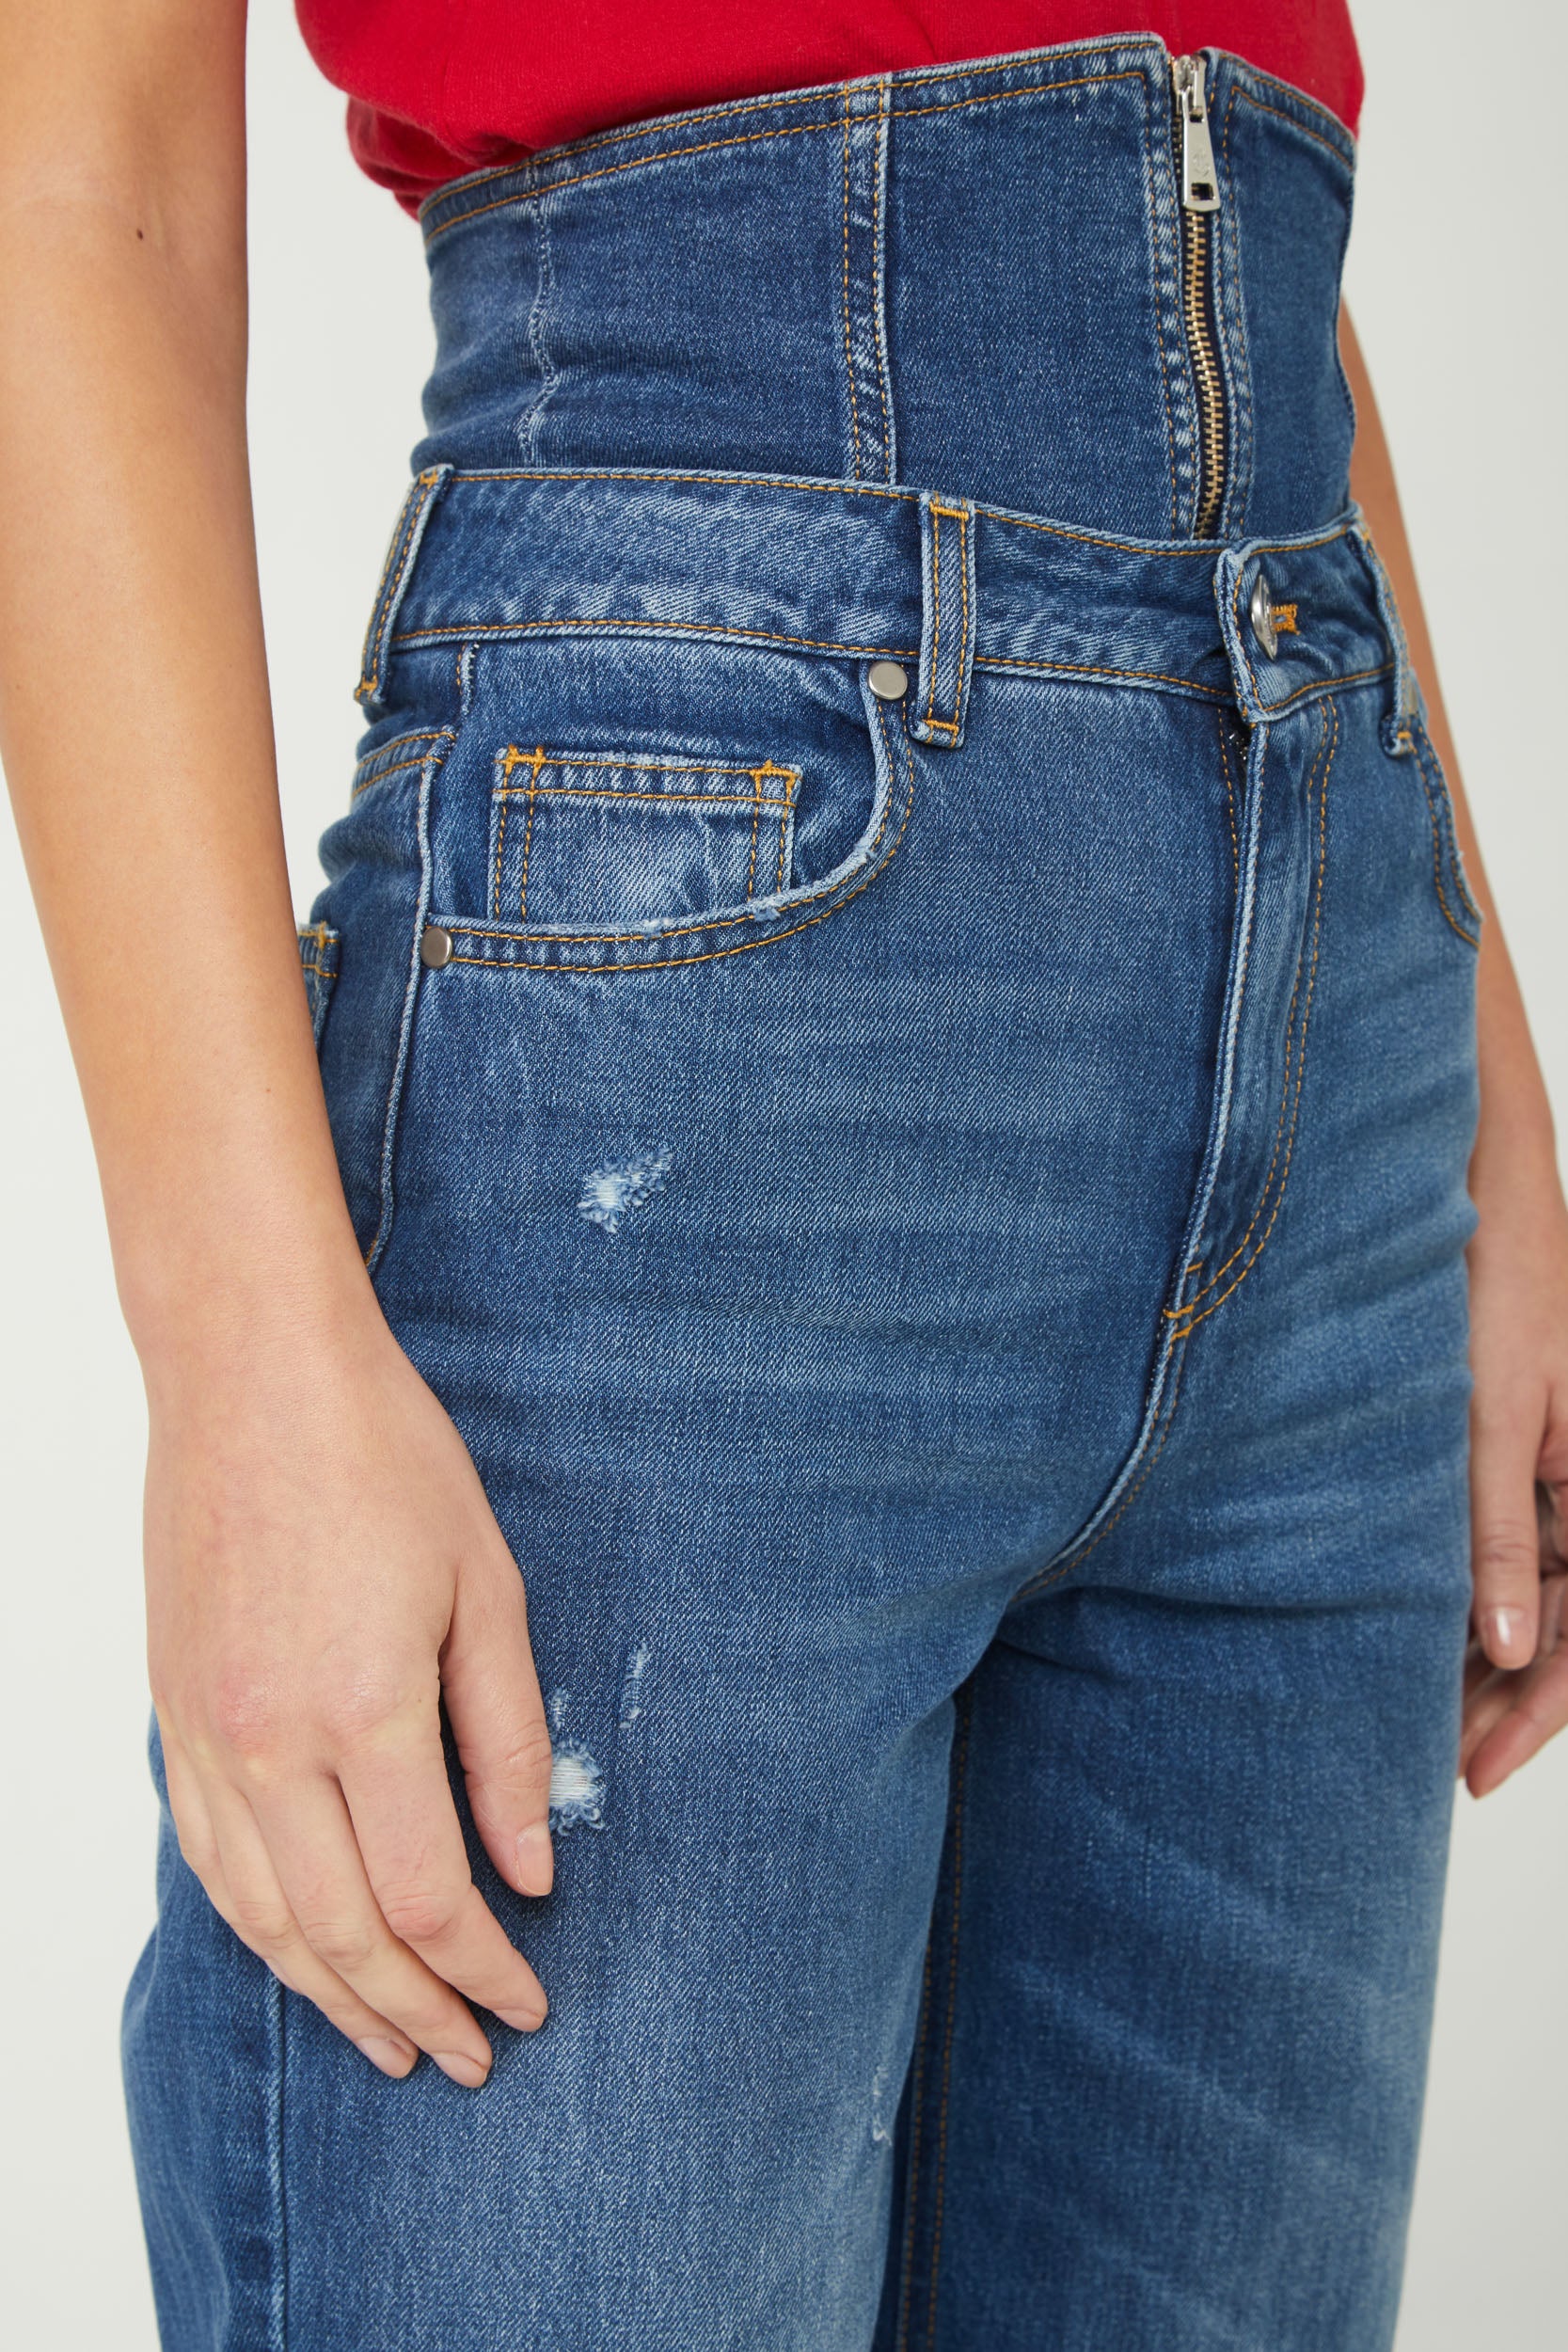 GAELLE-Jeans mit hoher Taille